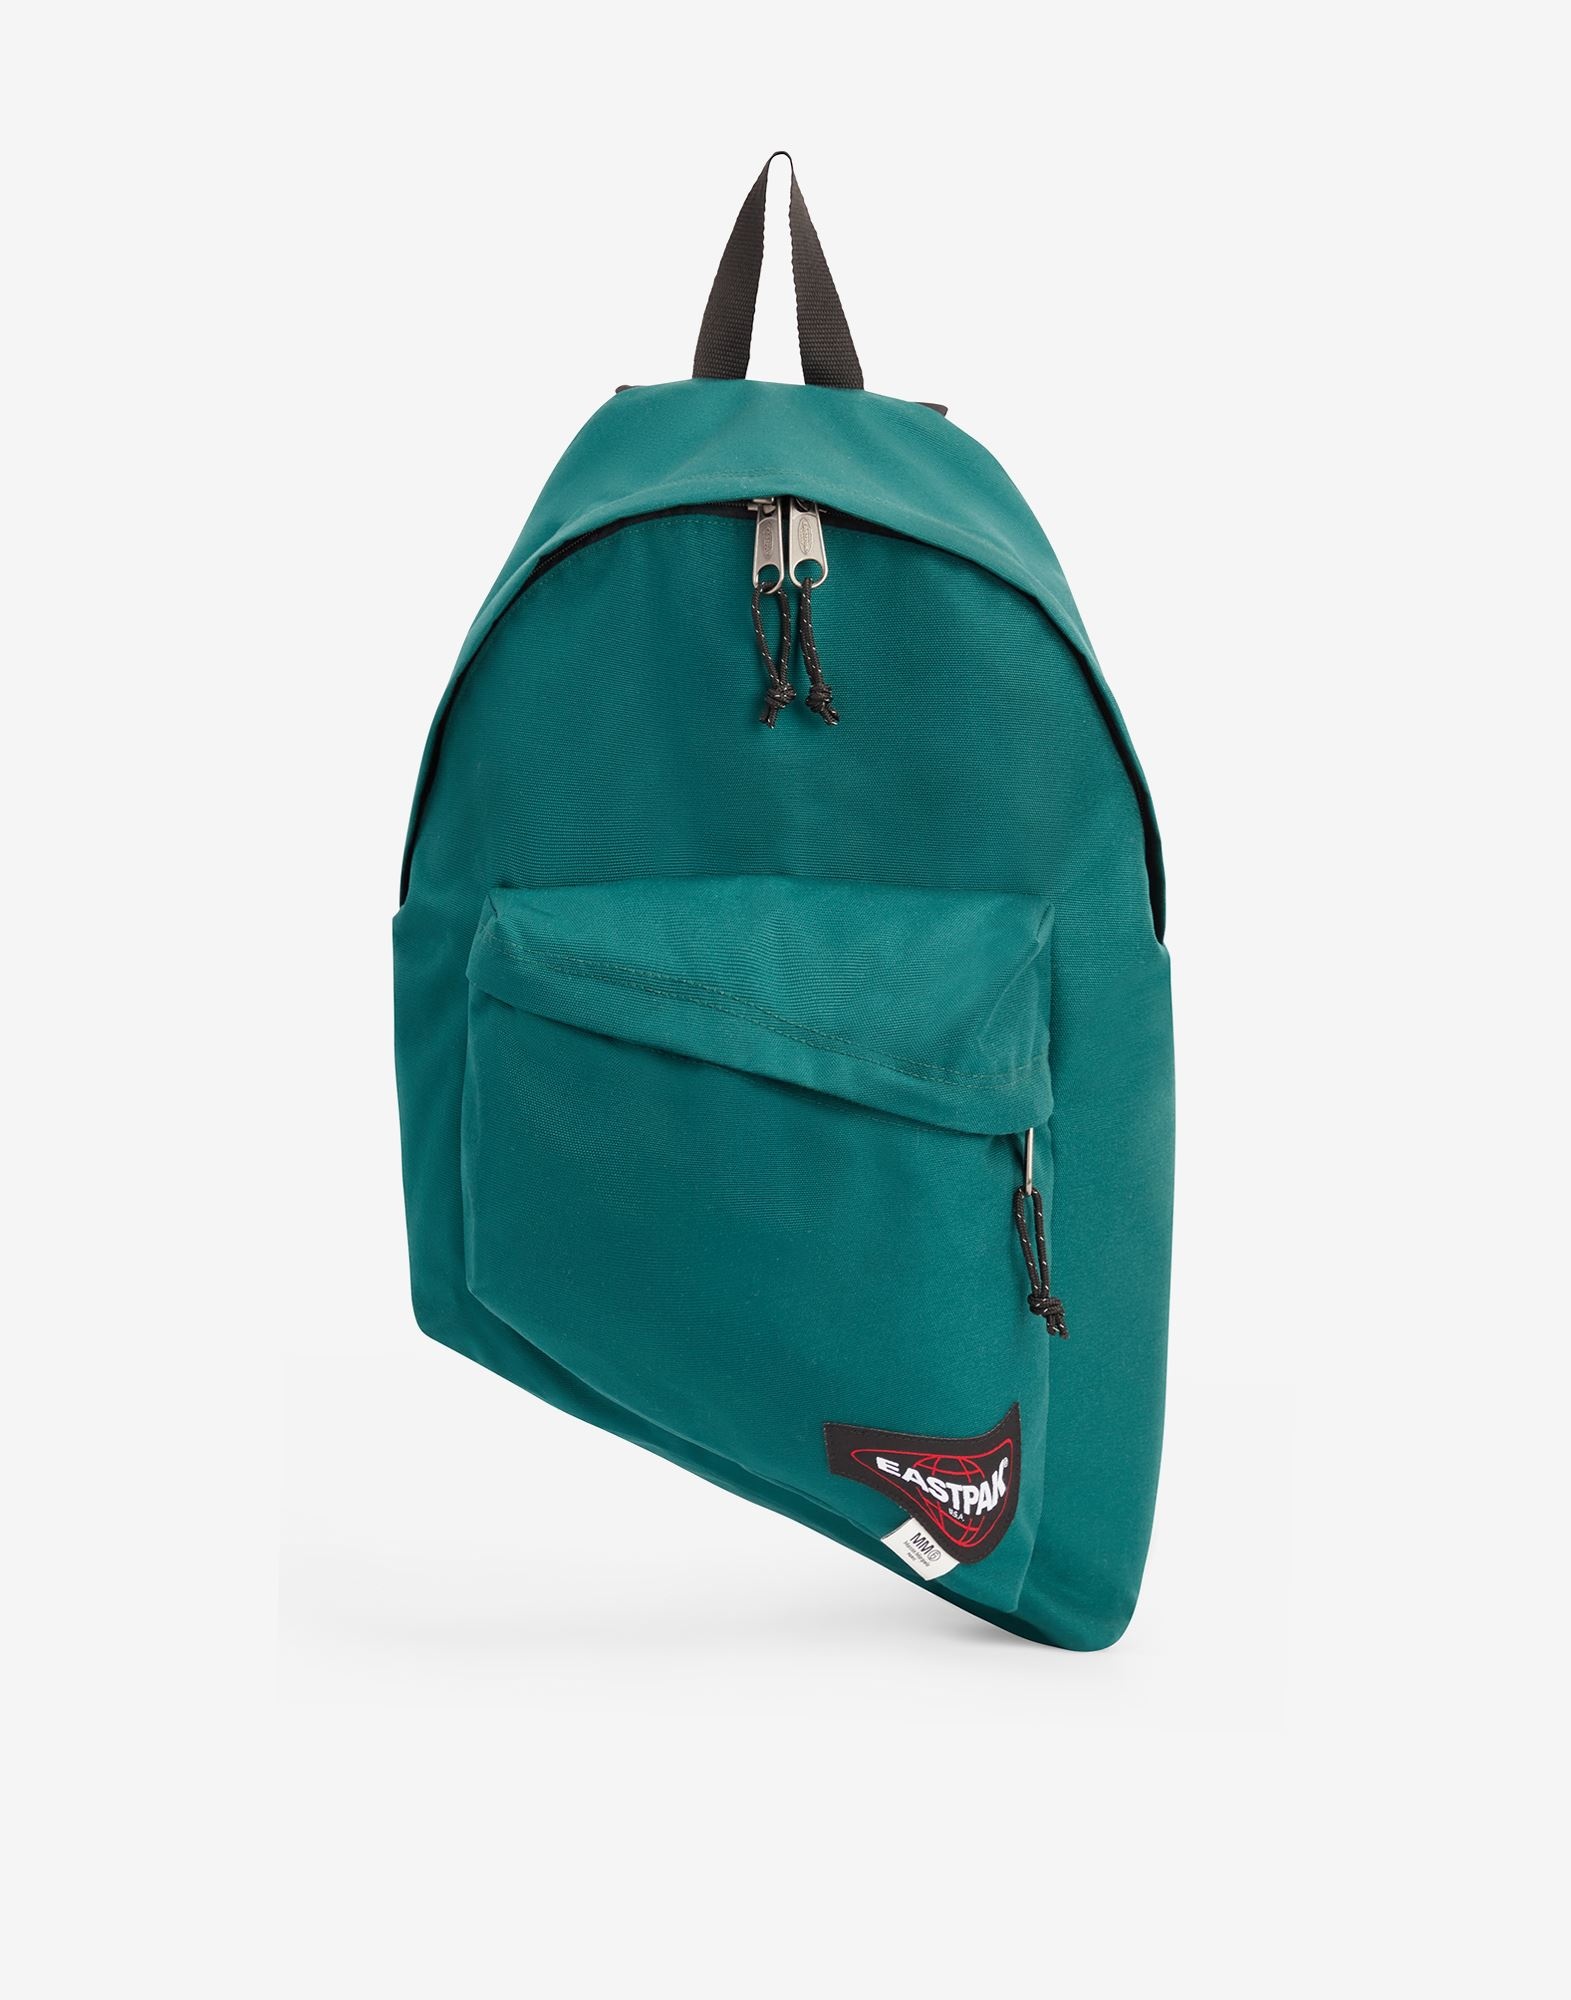 MM6 x Eastpak
Dripping Backpack - 1